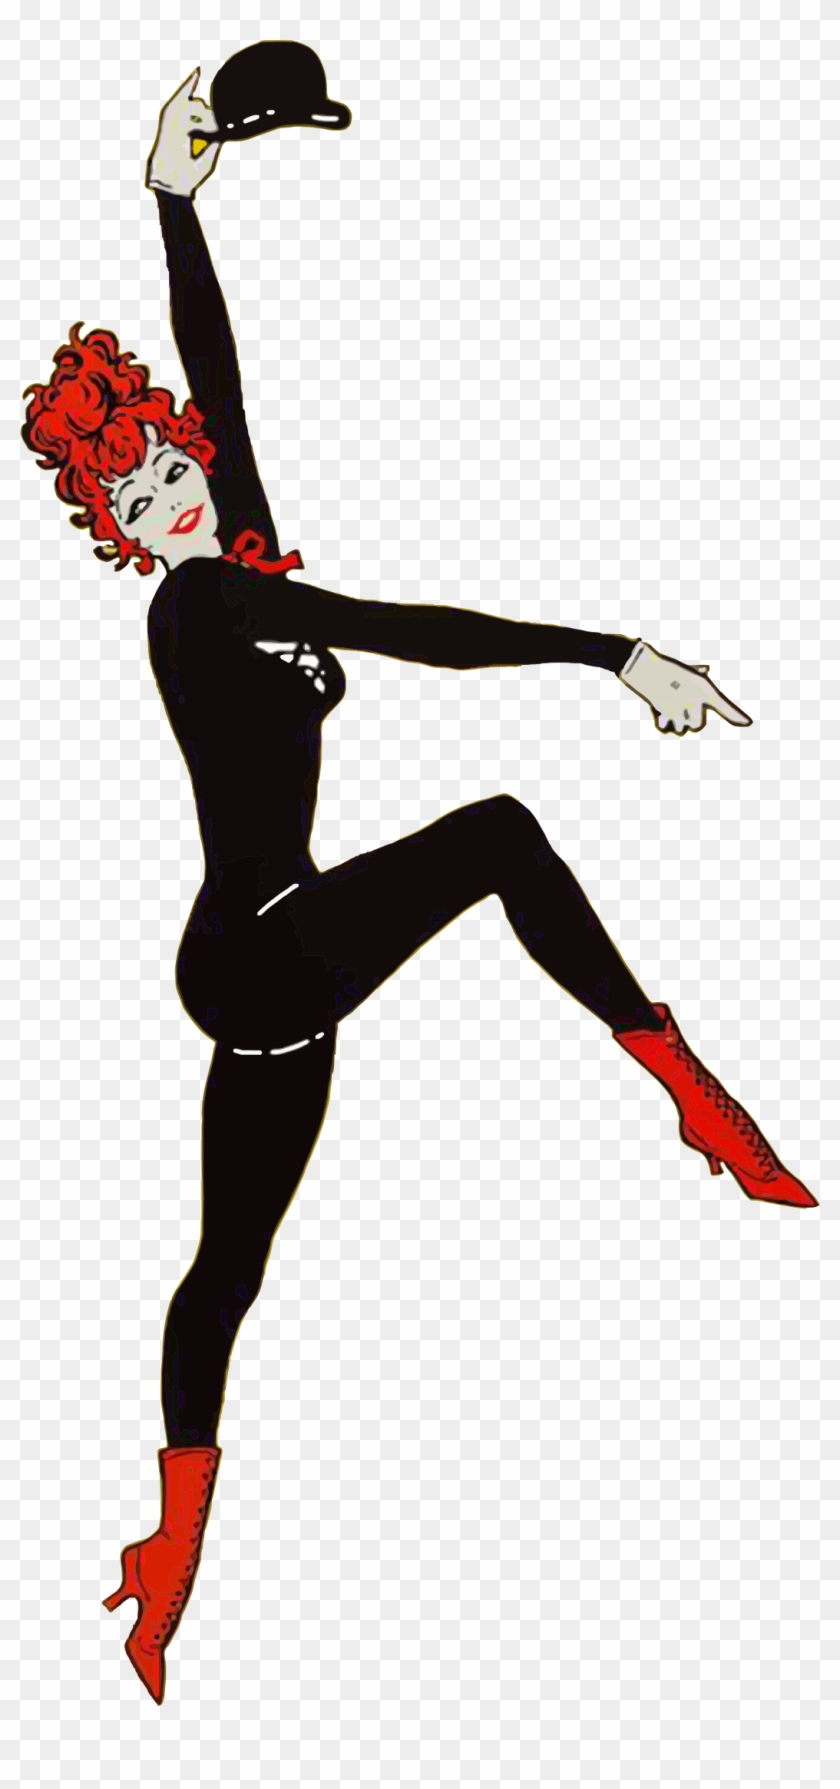 This Free Icons Png Design Of Vintage Broadway Dancer Clipart #841008